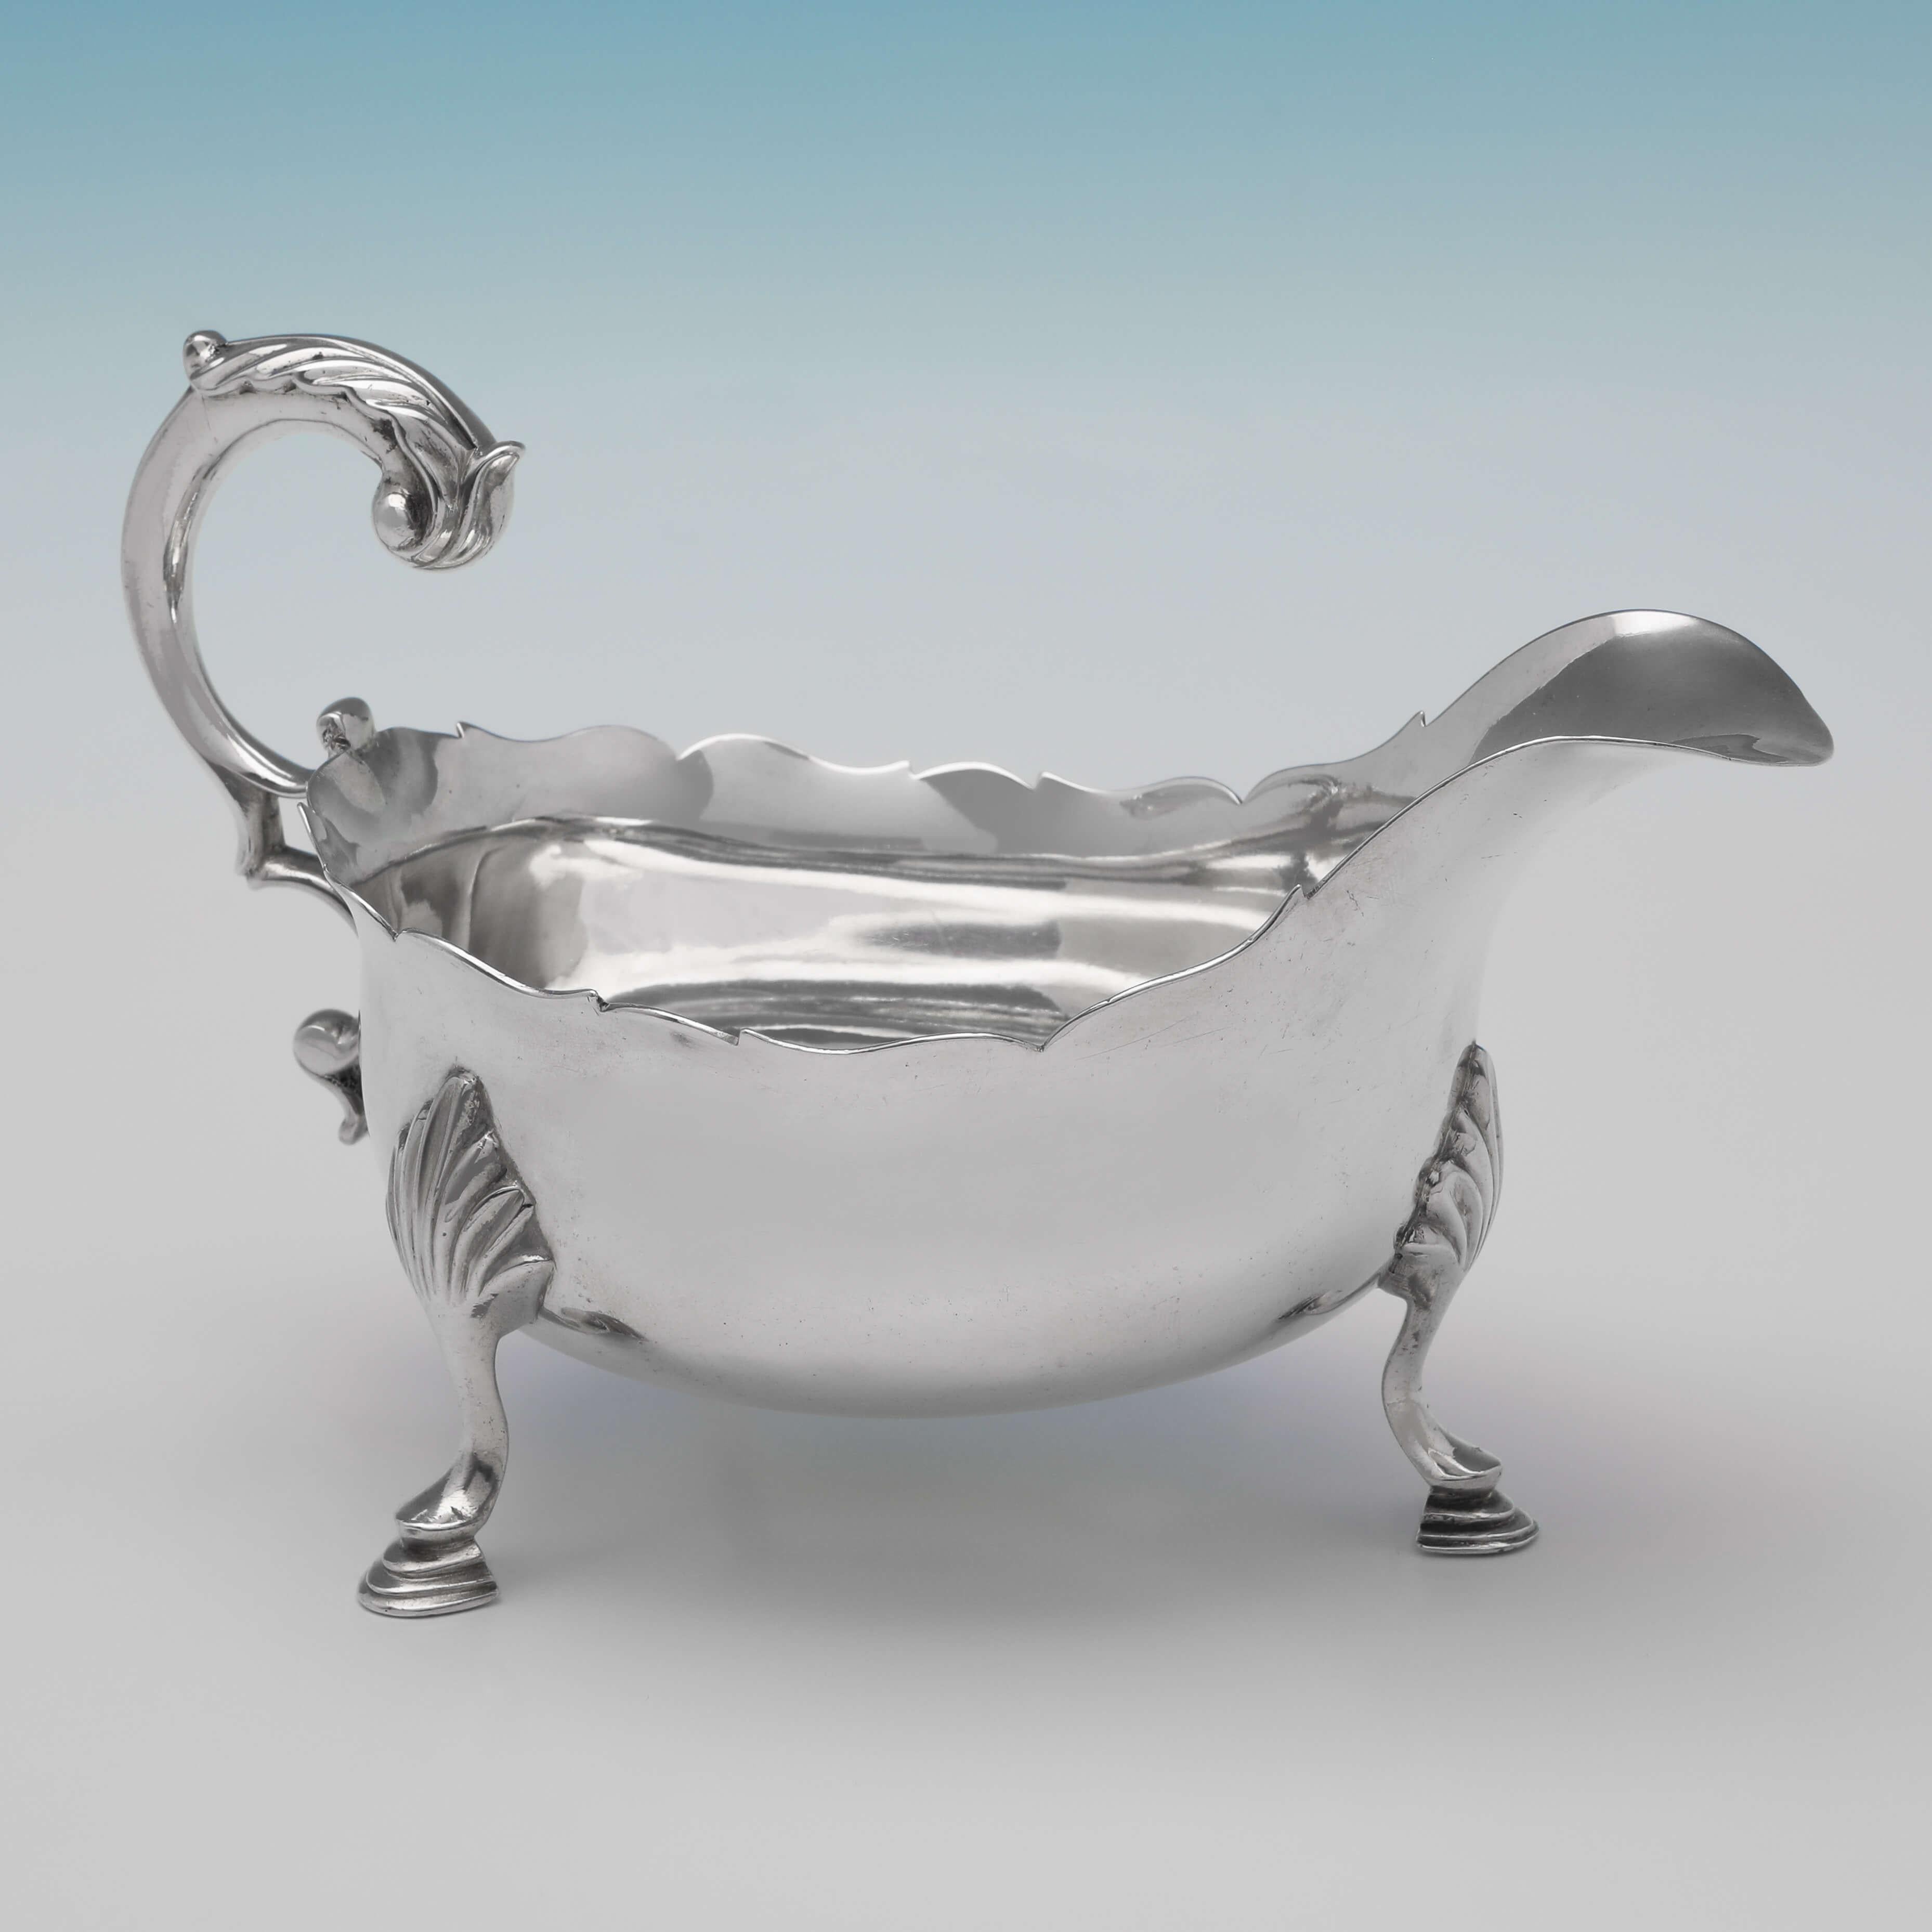 Hallmarked in London in 1760 by William Skeen, this George III, Antique Sterling Silver sauce boat, features a shaped border, an acanthus detailed flying C-scroll handle, and stands on three hoof feet. The sauce boat measures 4.5